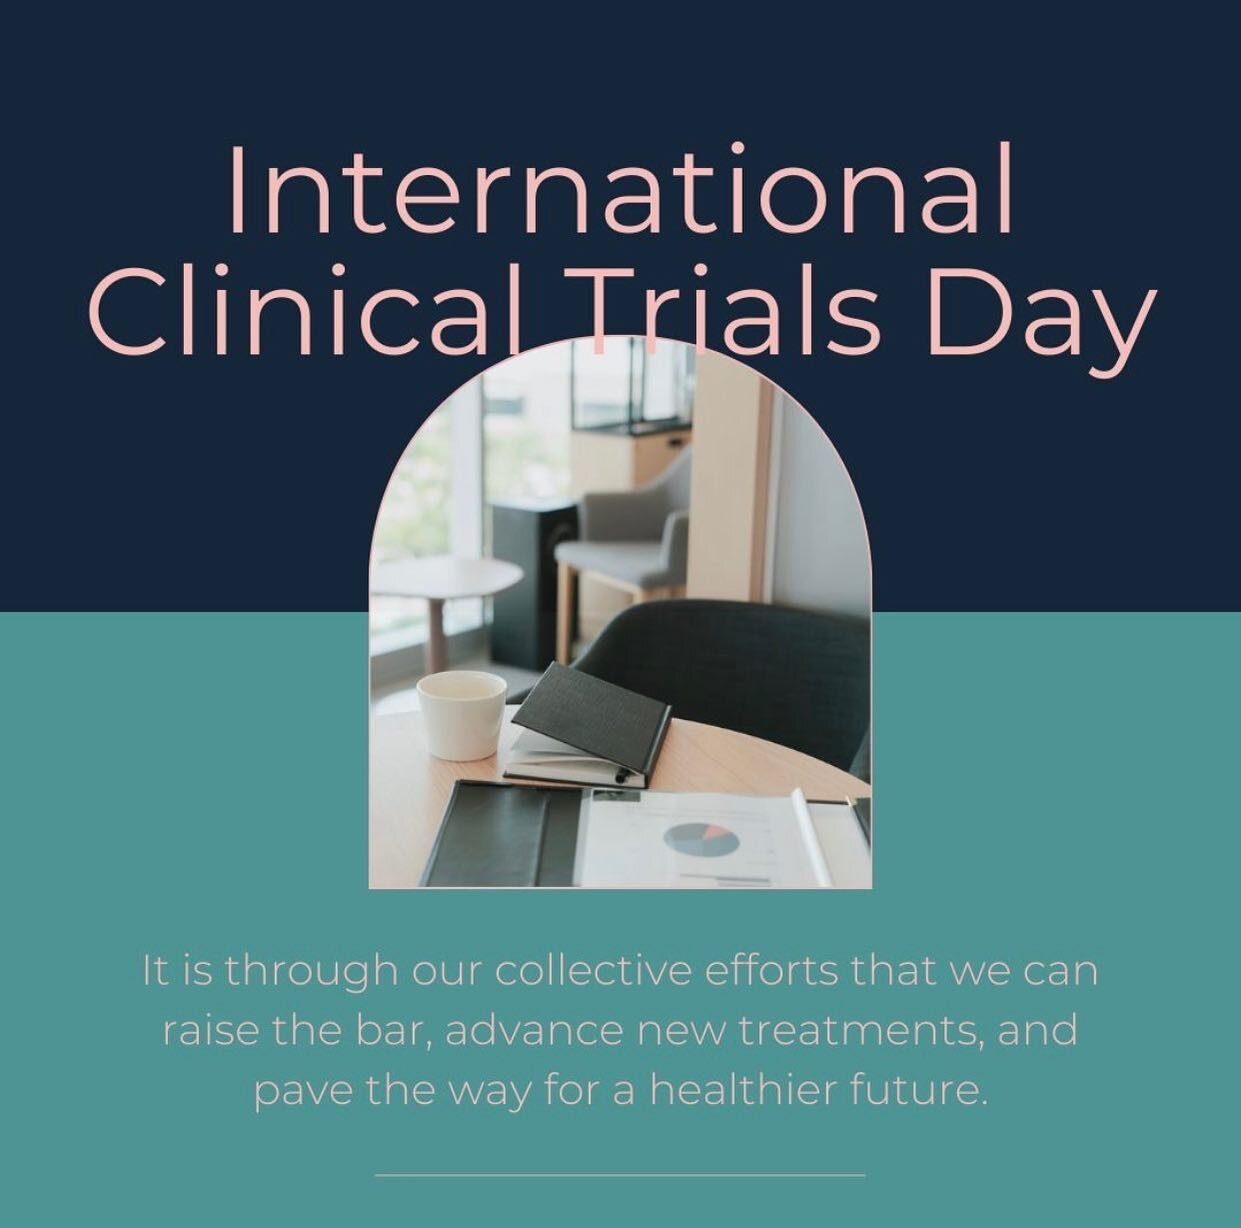 Today, we celebrate International Clinical Trials Day! 🎊
 
We extend heartfelt gratitude to all study participants, research professionals, physicians, and others who contribute countless hours to clinical trials. Your unwavering commitment to globa